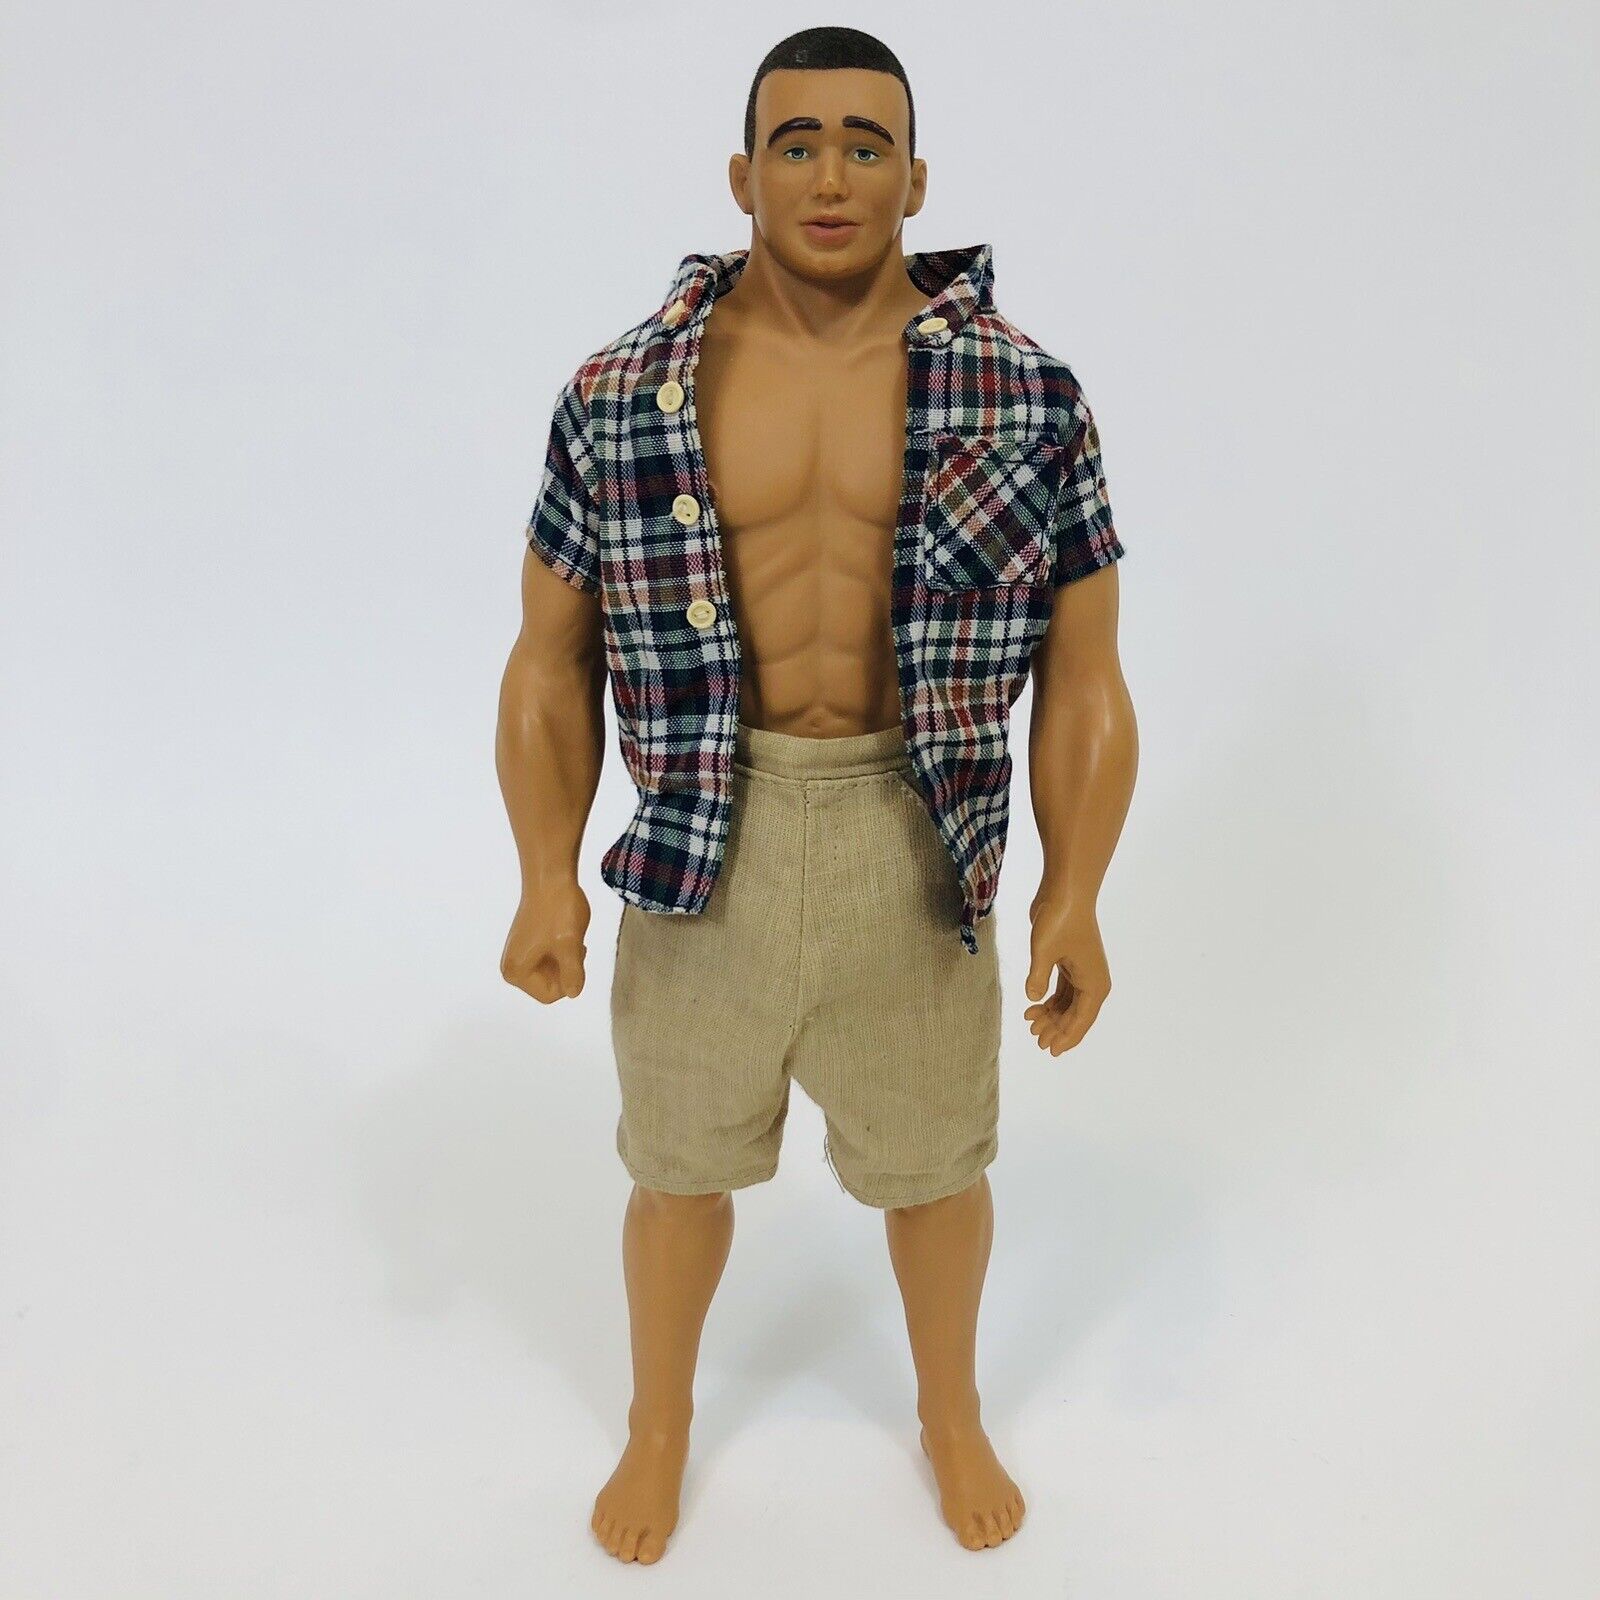 Vintage Billy Out And Proud Gay Doll With Shirt & Shorts From Totem Rare Figure